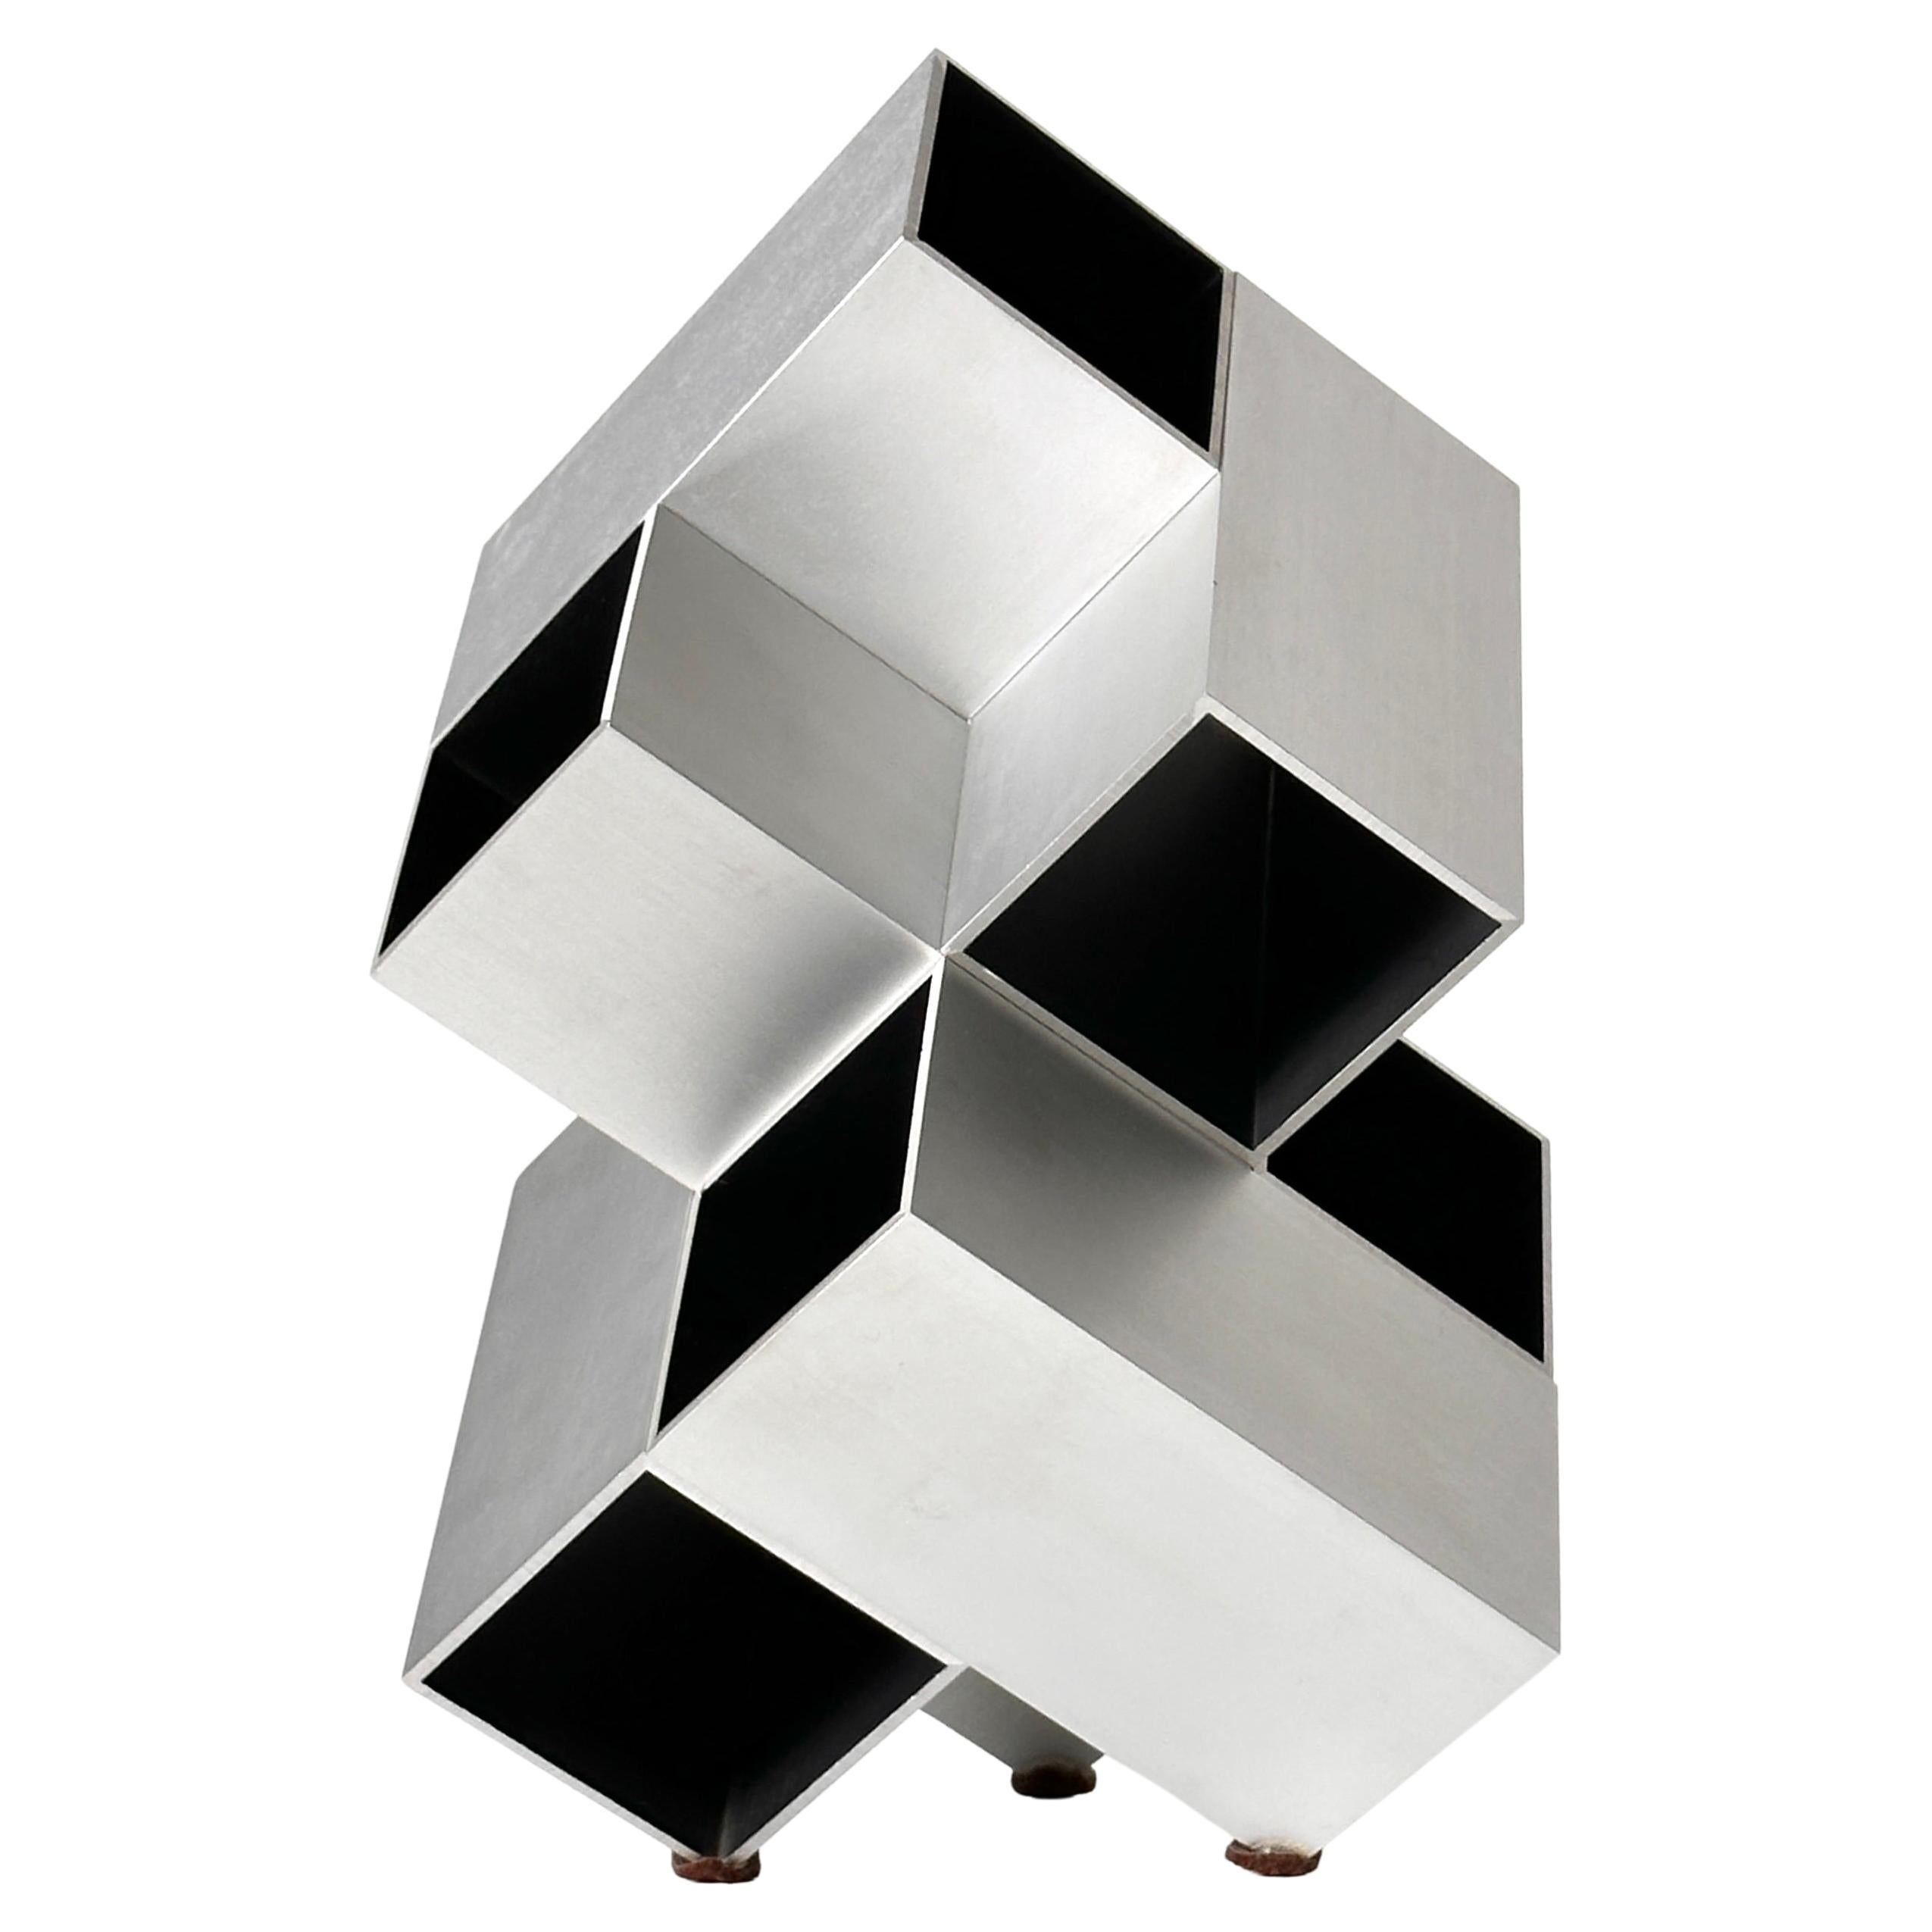 Modular Cube Sculpture by Kosso Eloul Israeli Artist 1920-1995 Toronto Canada  For Sale